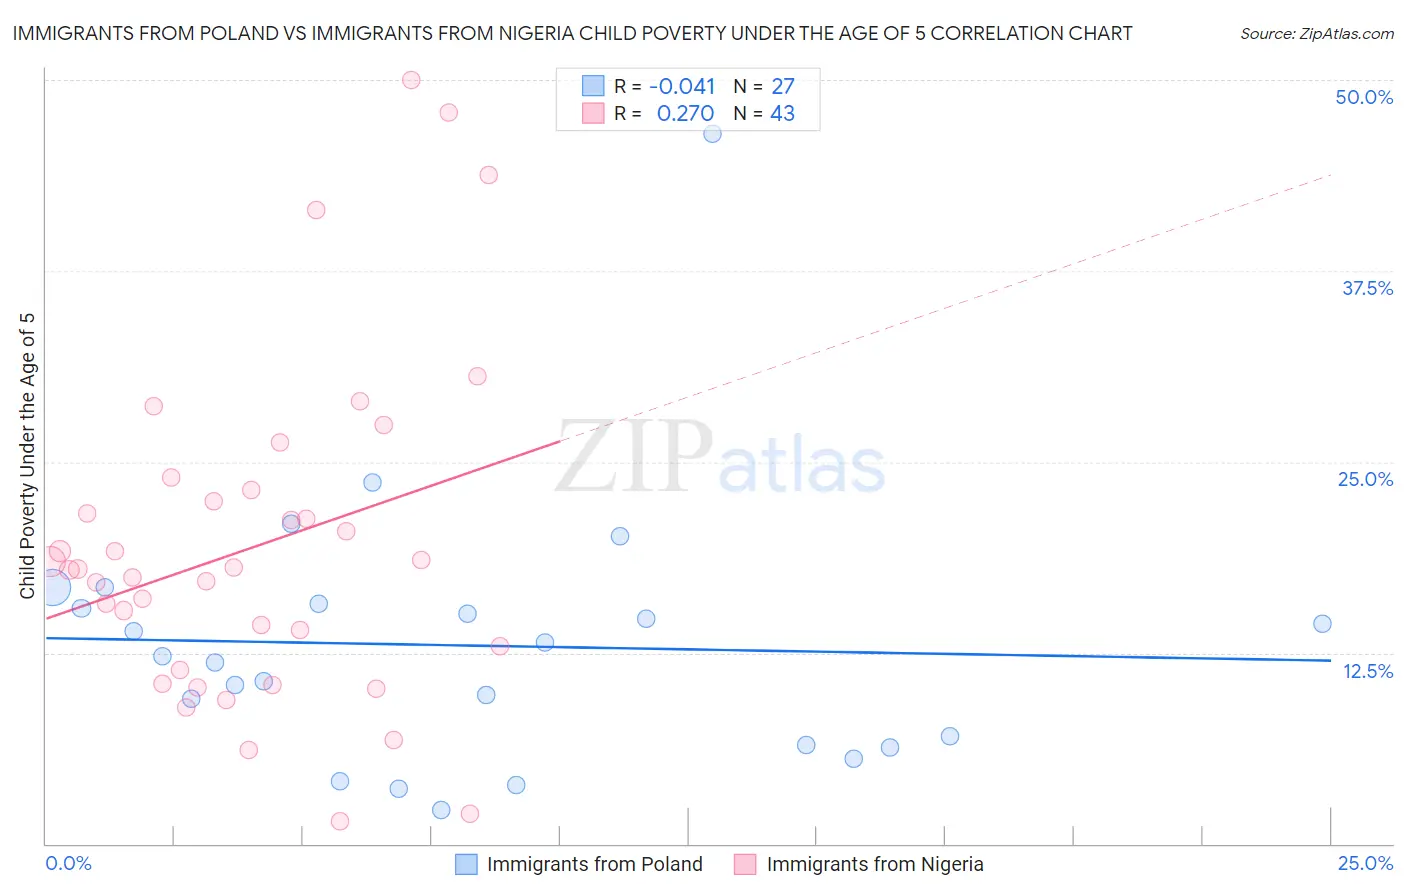 Immigrants from Poland vs Immigrants from Nigeria Child Poverty Under the Age of 5